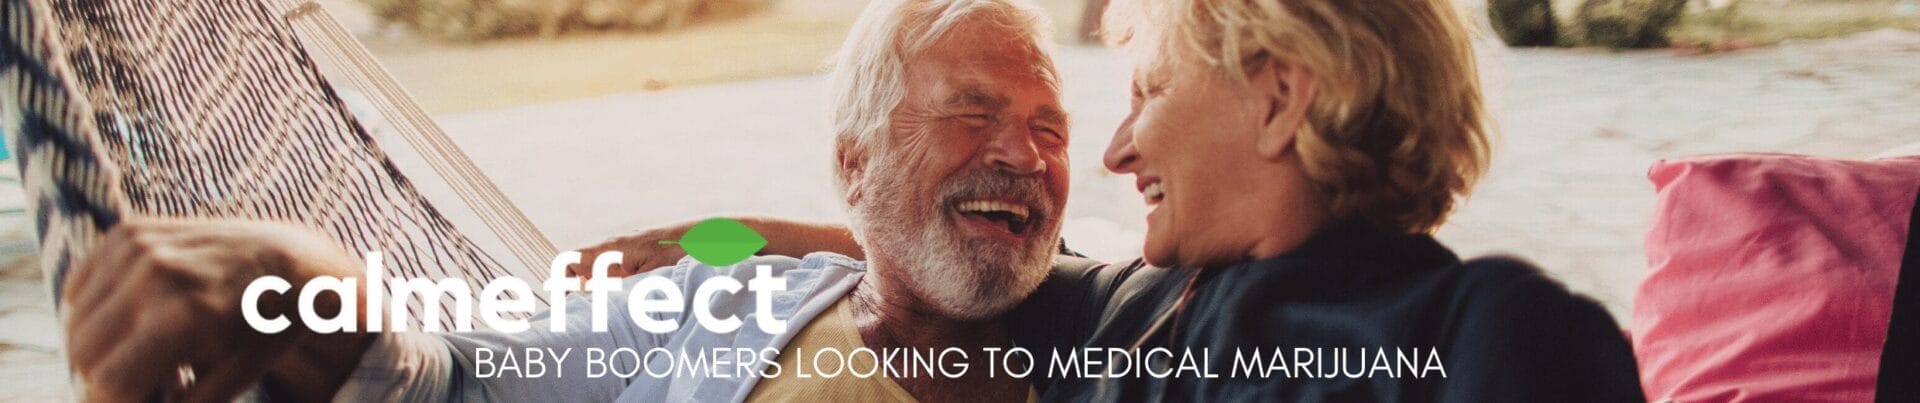 Are Baby Boomers Looking to Medical Marijuana for Relief?